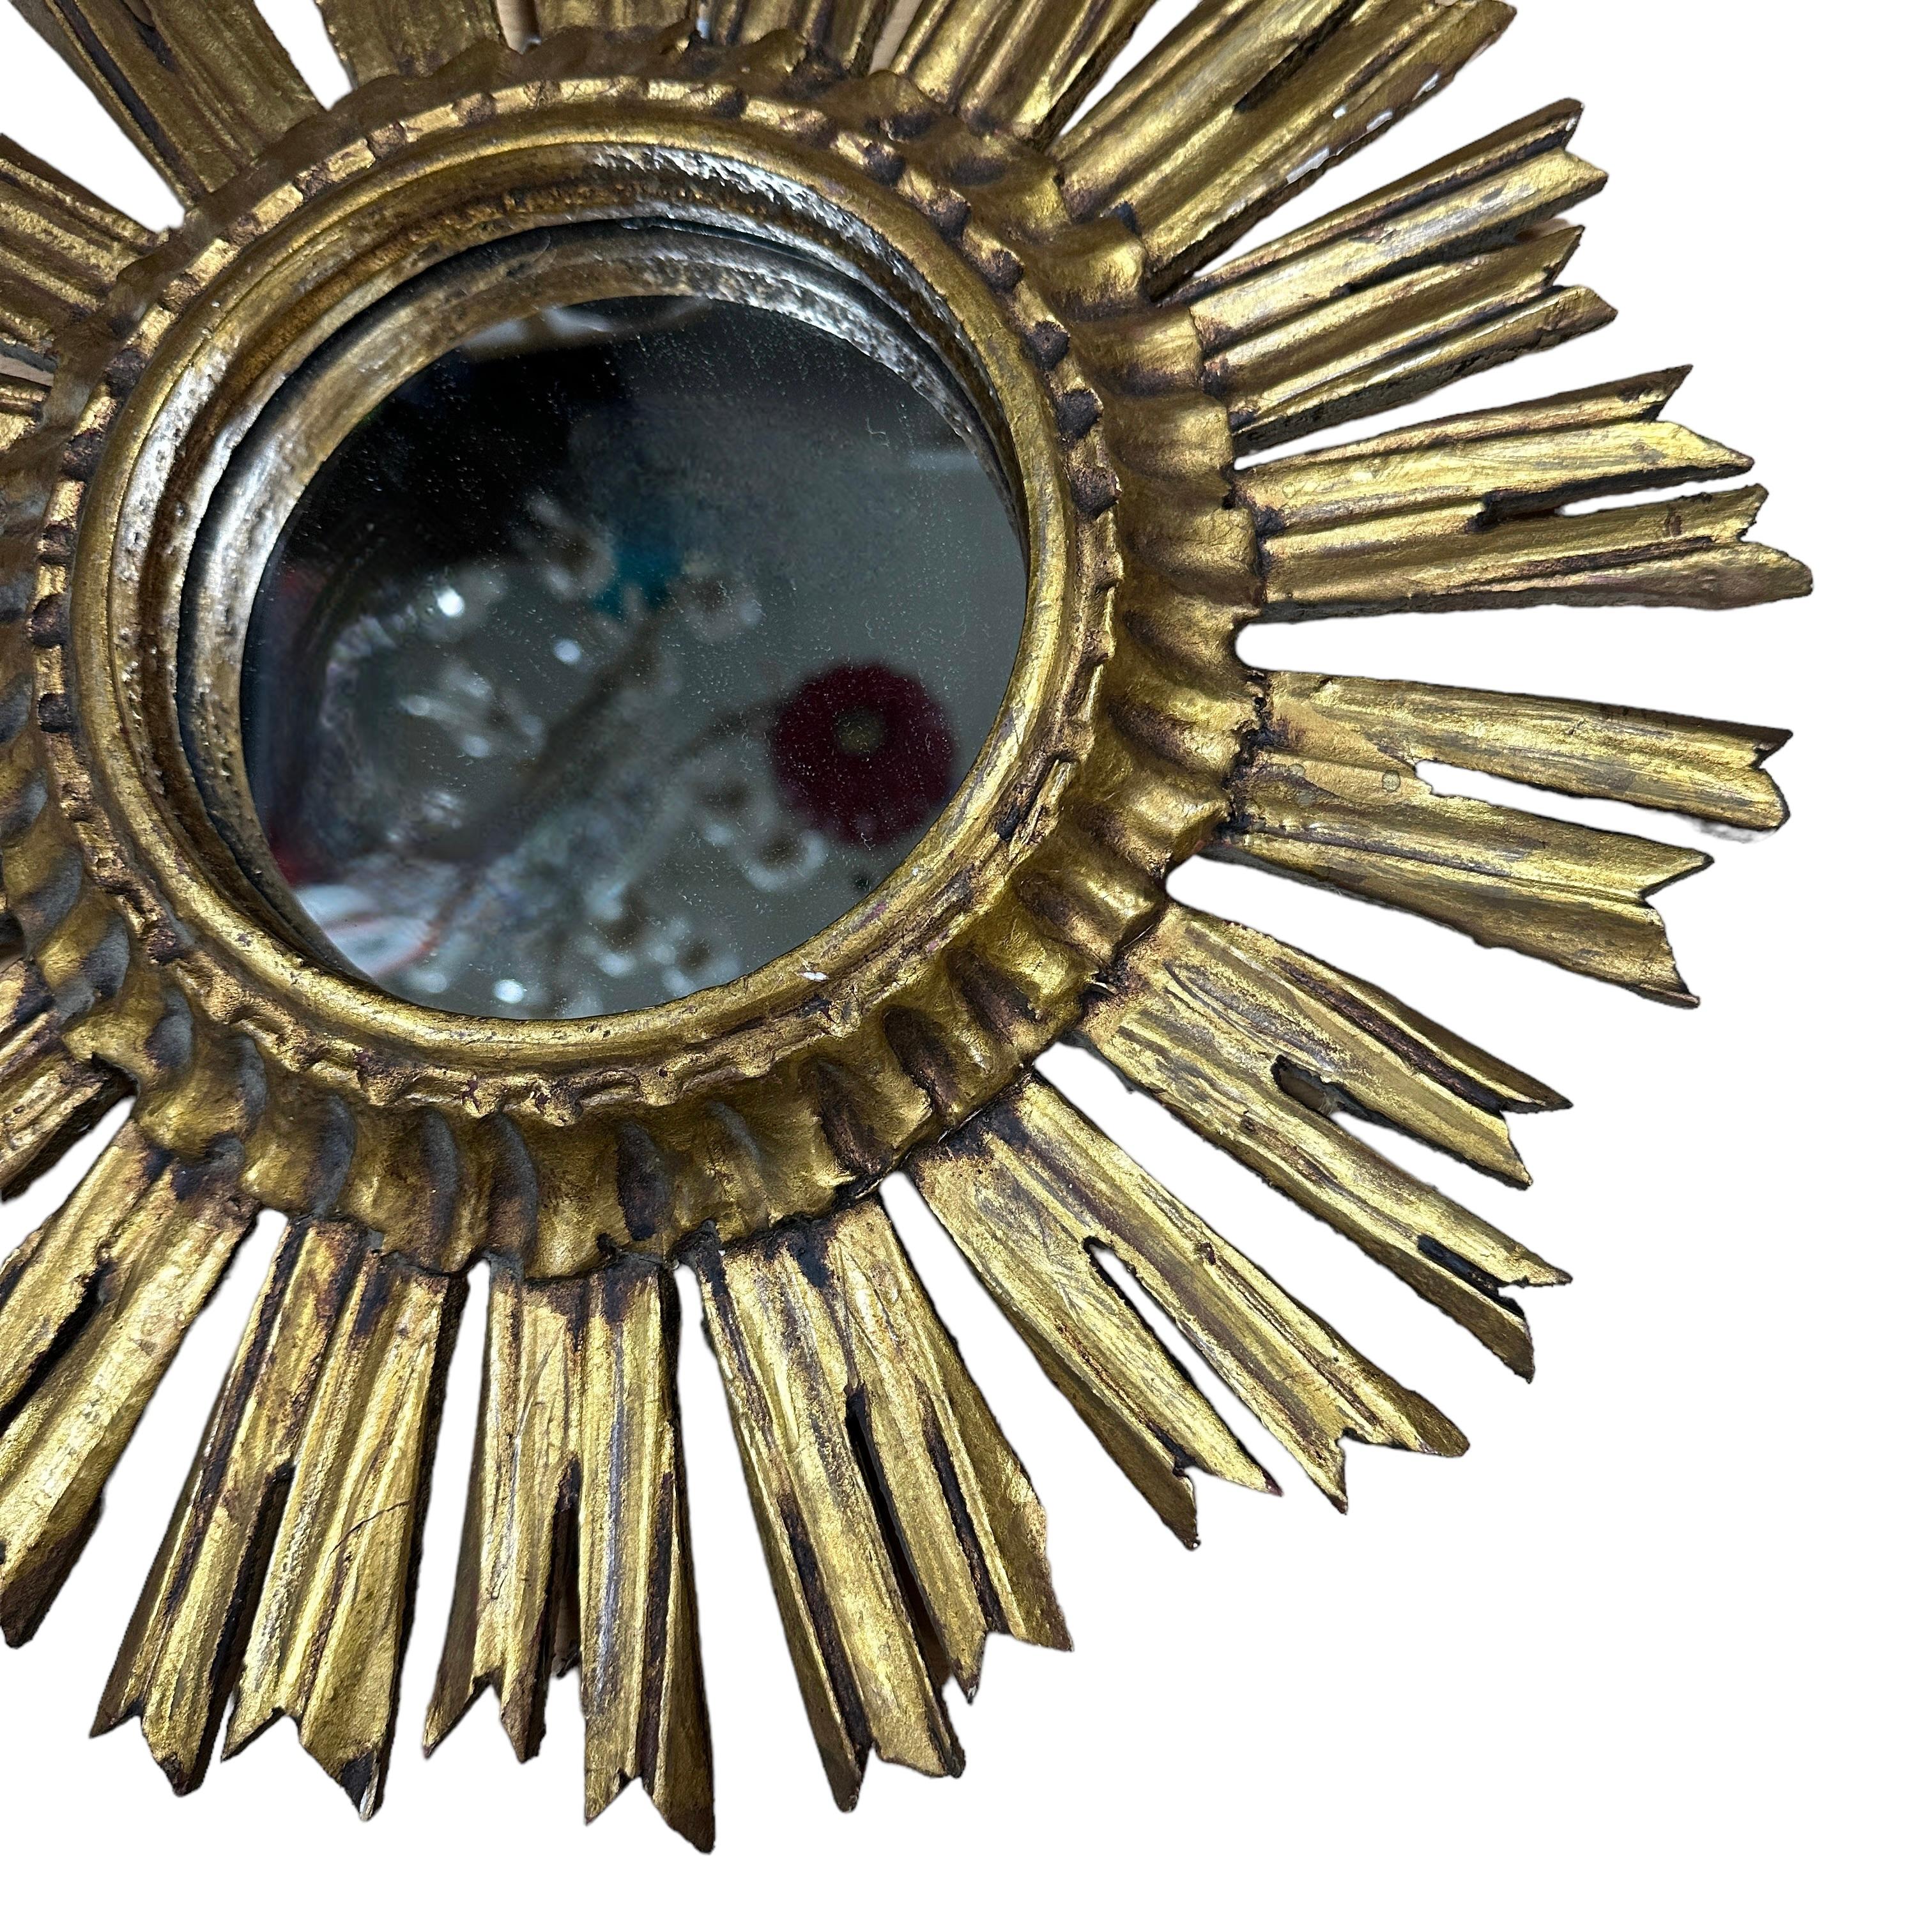 A beautiful starburst sunburst mirror. Made of gilded wood. It measures approximate 15.75